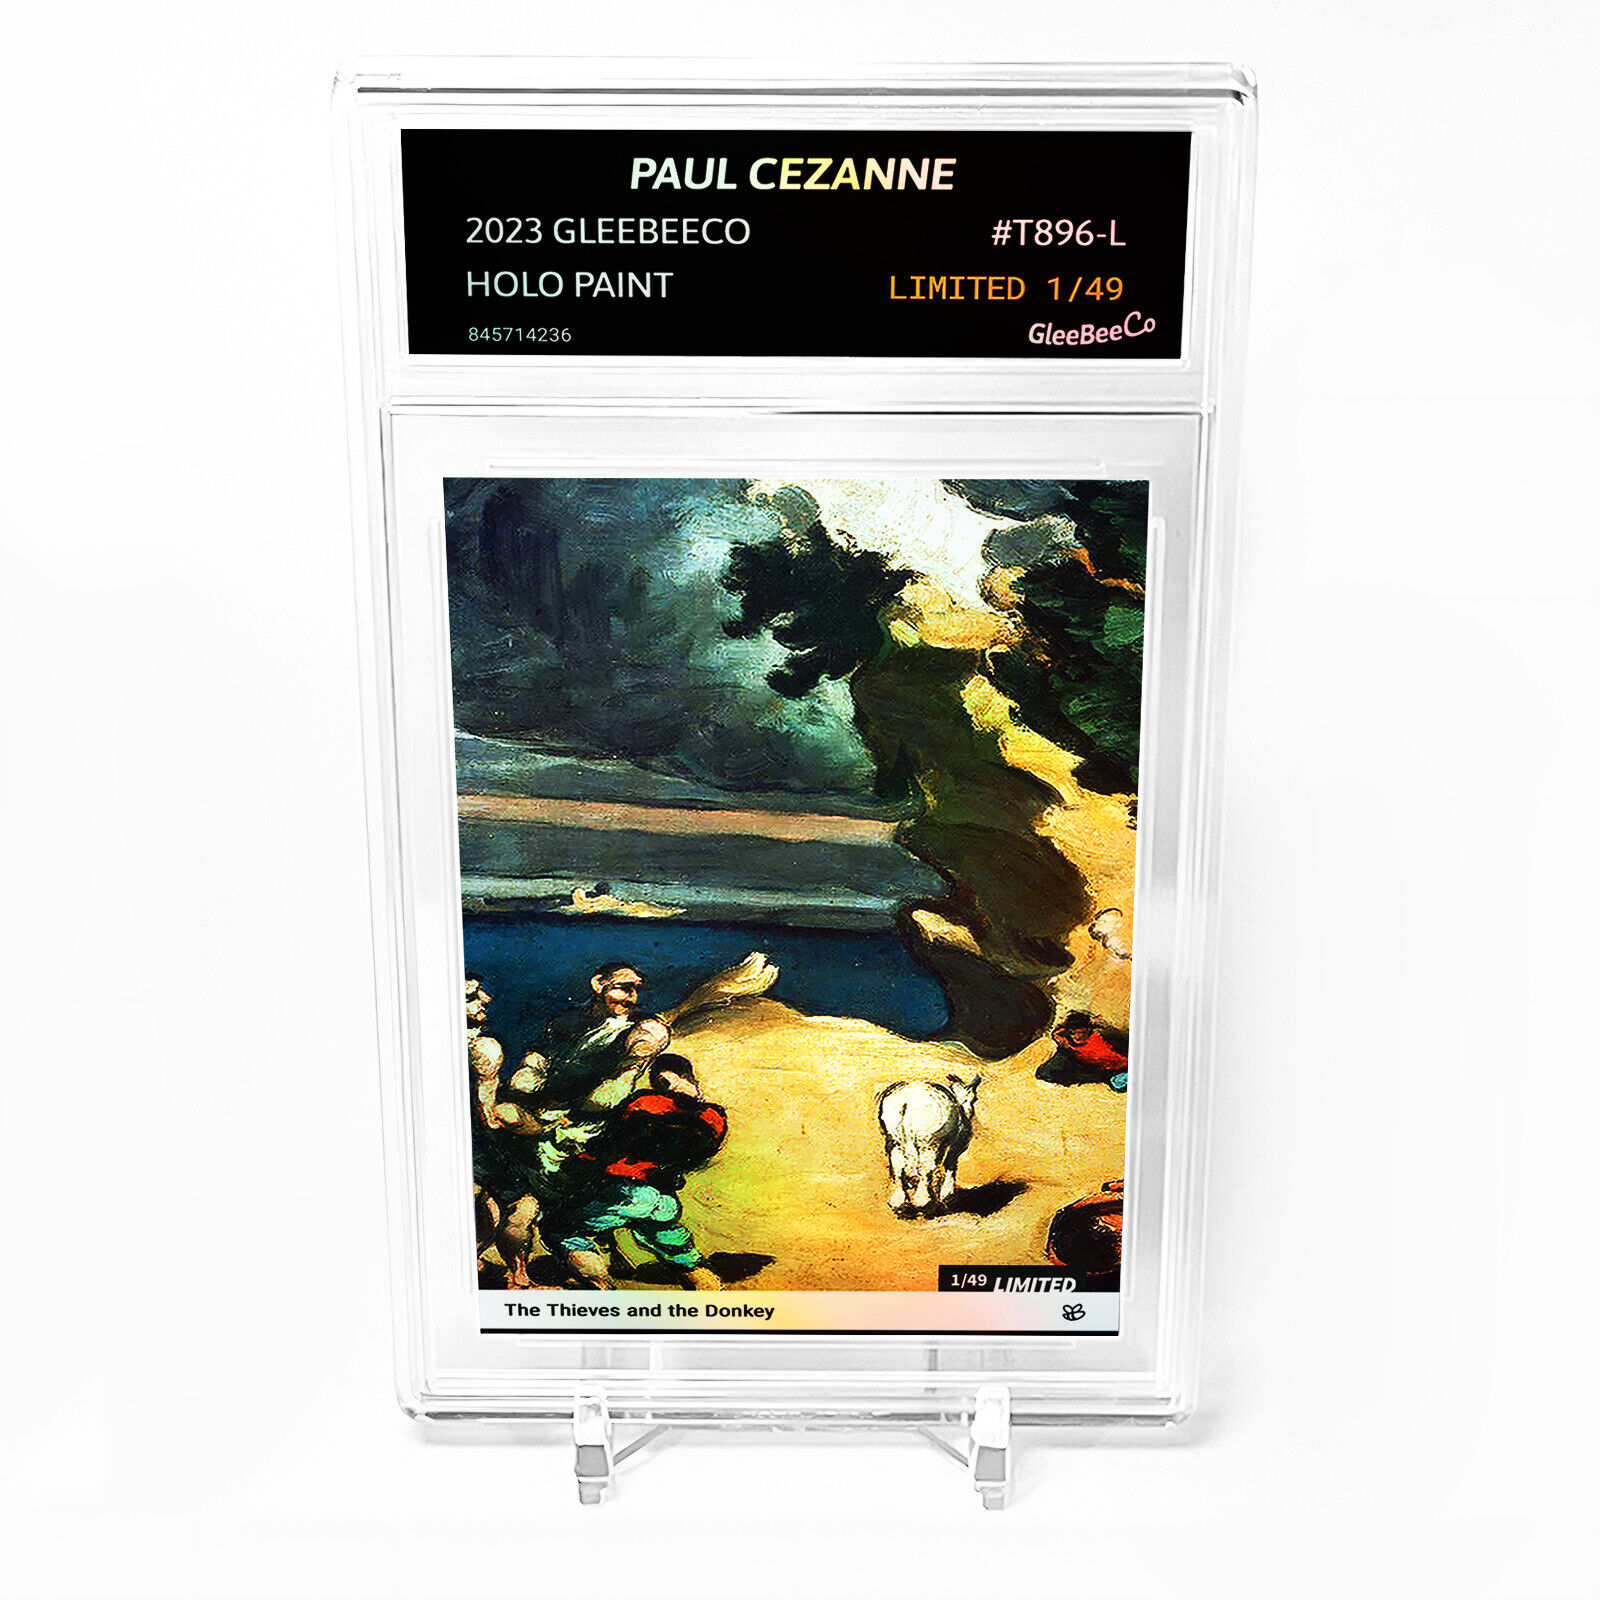 THE THIEVES AND THE DONKEY (Paul Cezanne) Card GBC #T896-L - Limited Edition /49